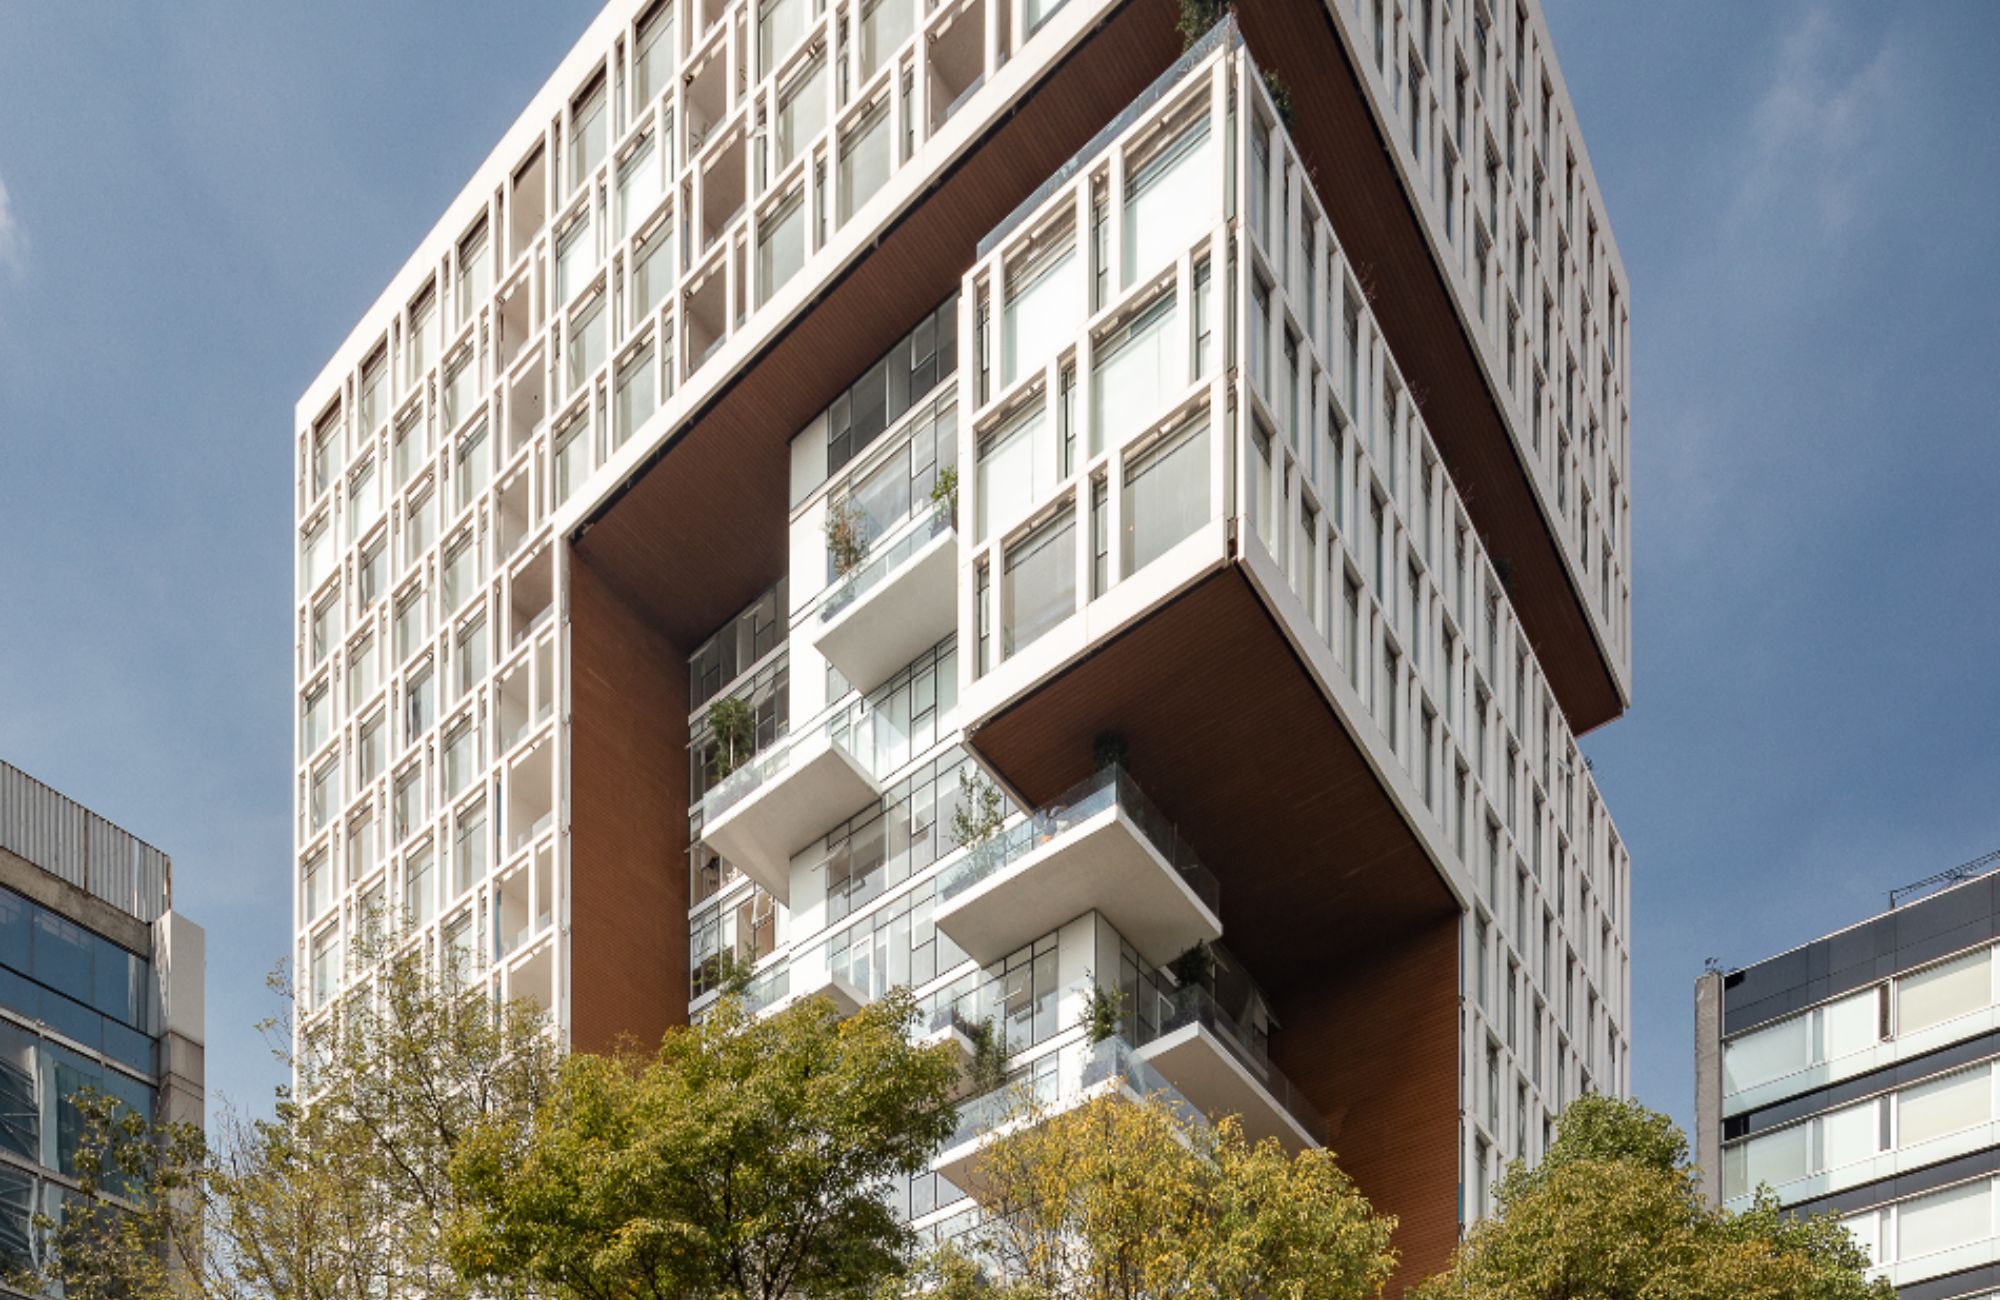 Condominium with 30 amenities, 13,000 m2 of green areas, designed by renown architect firm, Fuentes del Pedregal, for sale Mexico City